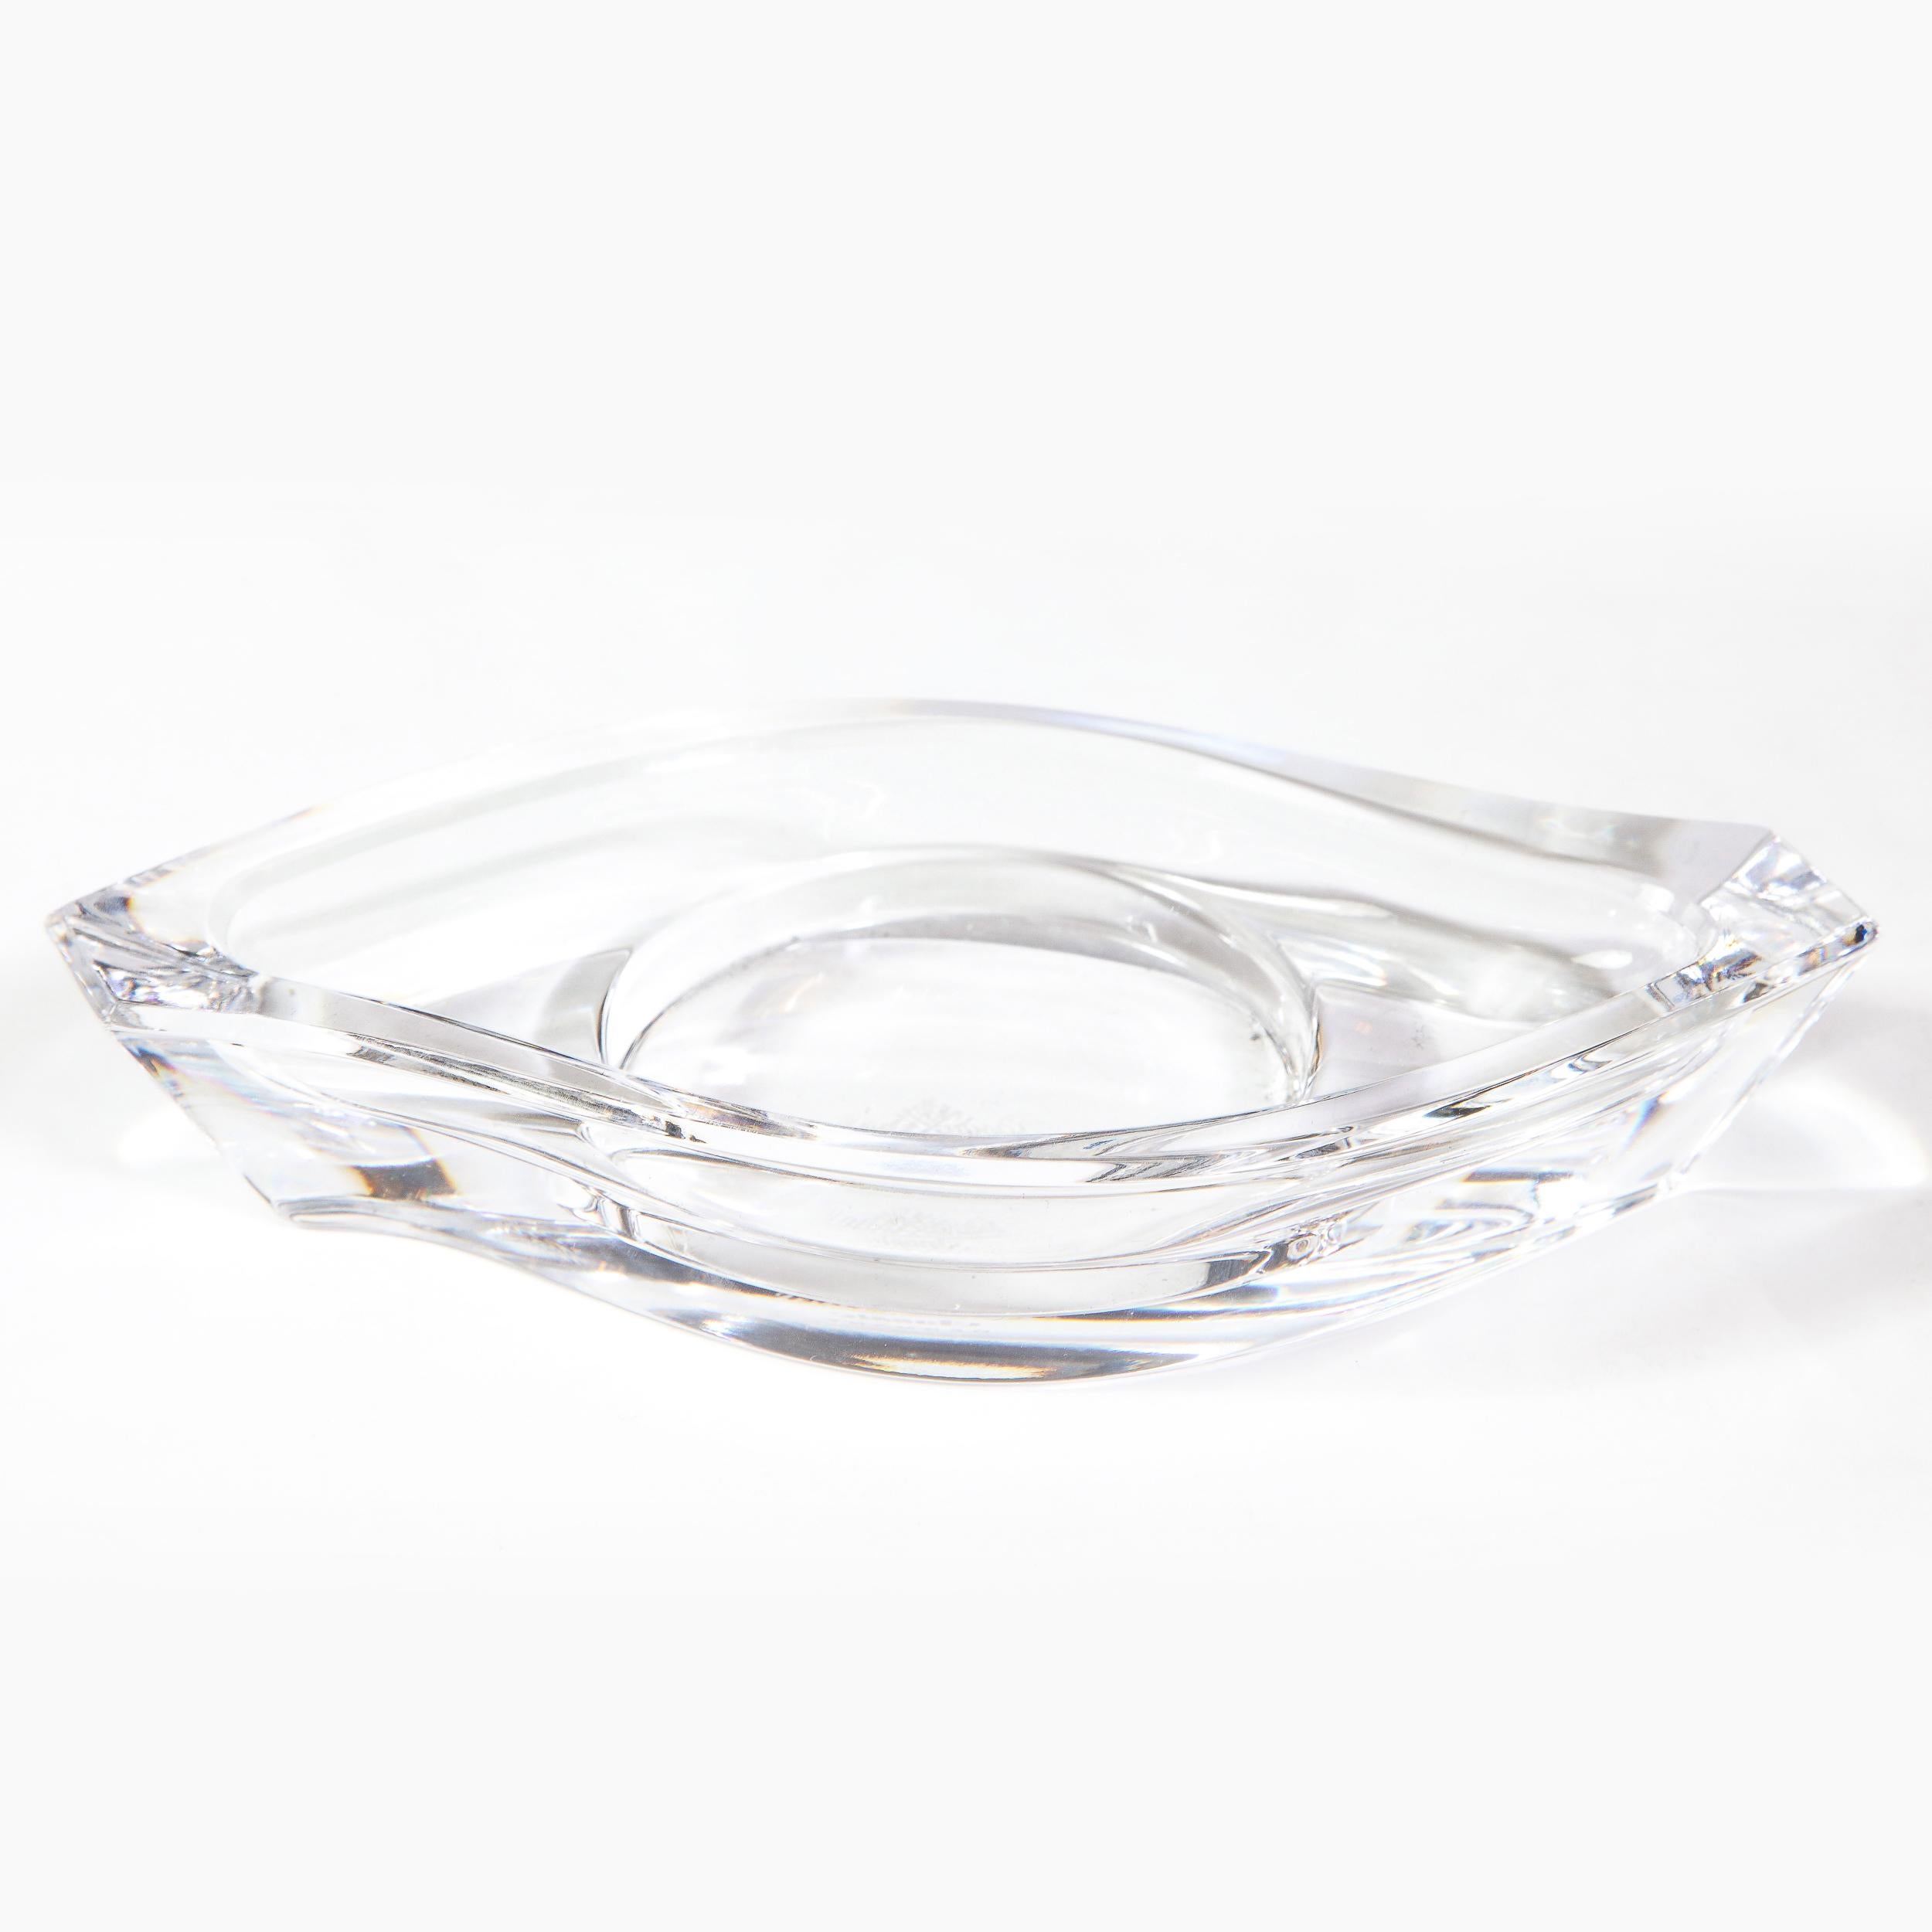 This stunning modernist dish was realized by the esteemed German maker Rosenthal. It offers a sinuously curved ellipsoid form with raised sides and a central circular depression. The form suggests the ancient Egyptian symbol of the Eye of Horus,